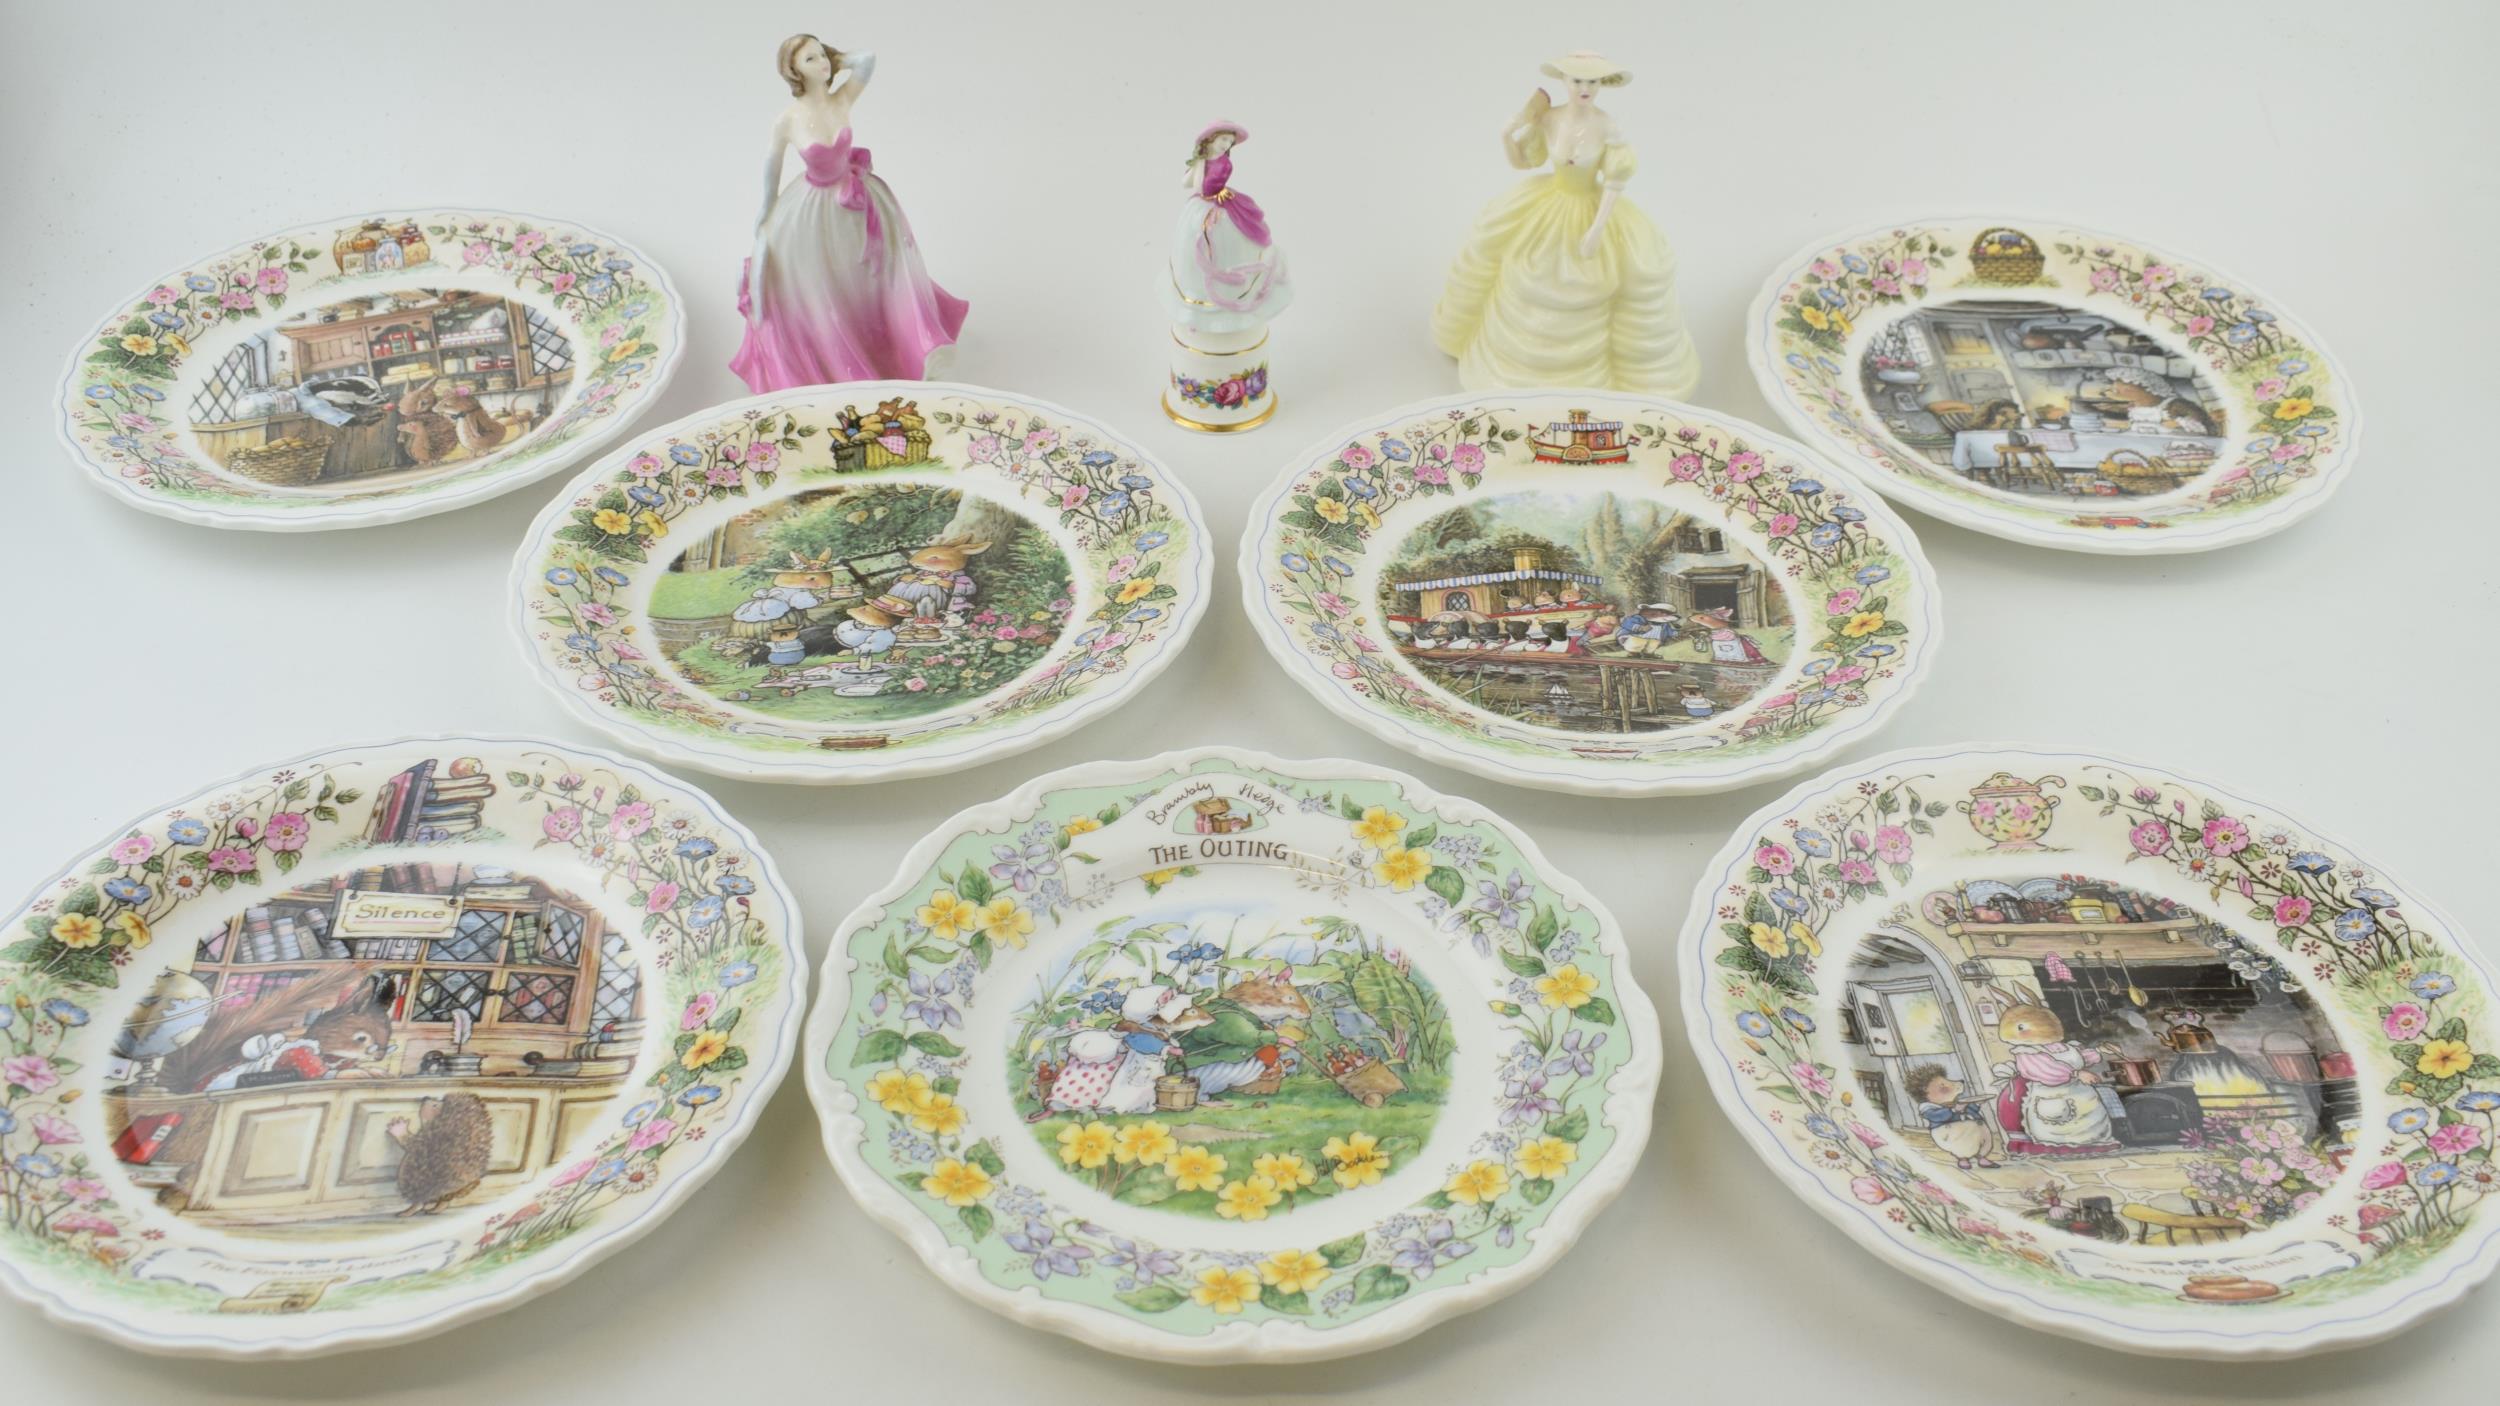 Pottery to include Royal Doulton Brambly Hedge plate 'The Outing', 6 Wedgwood Foxwood Tales plates